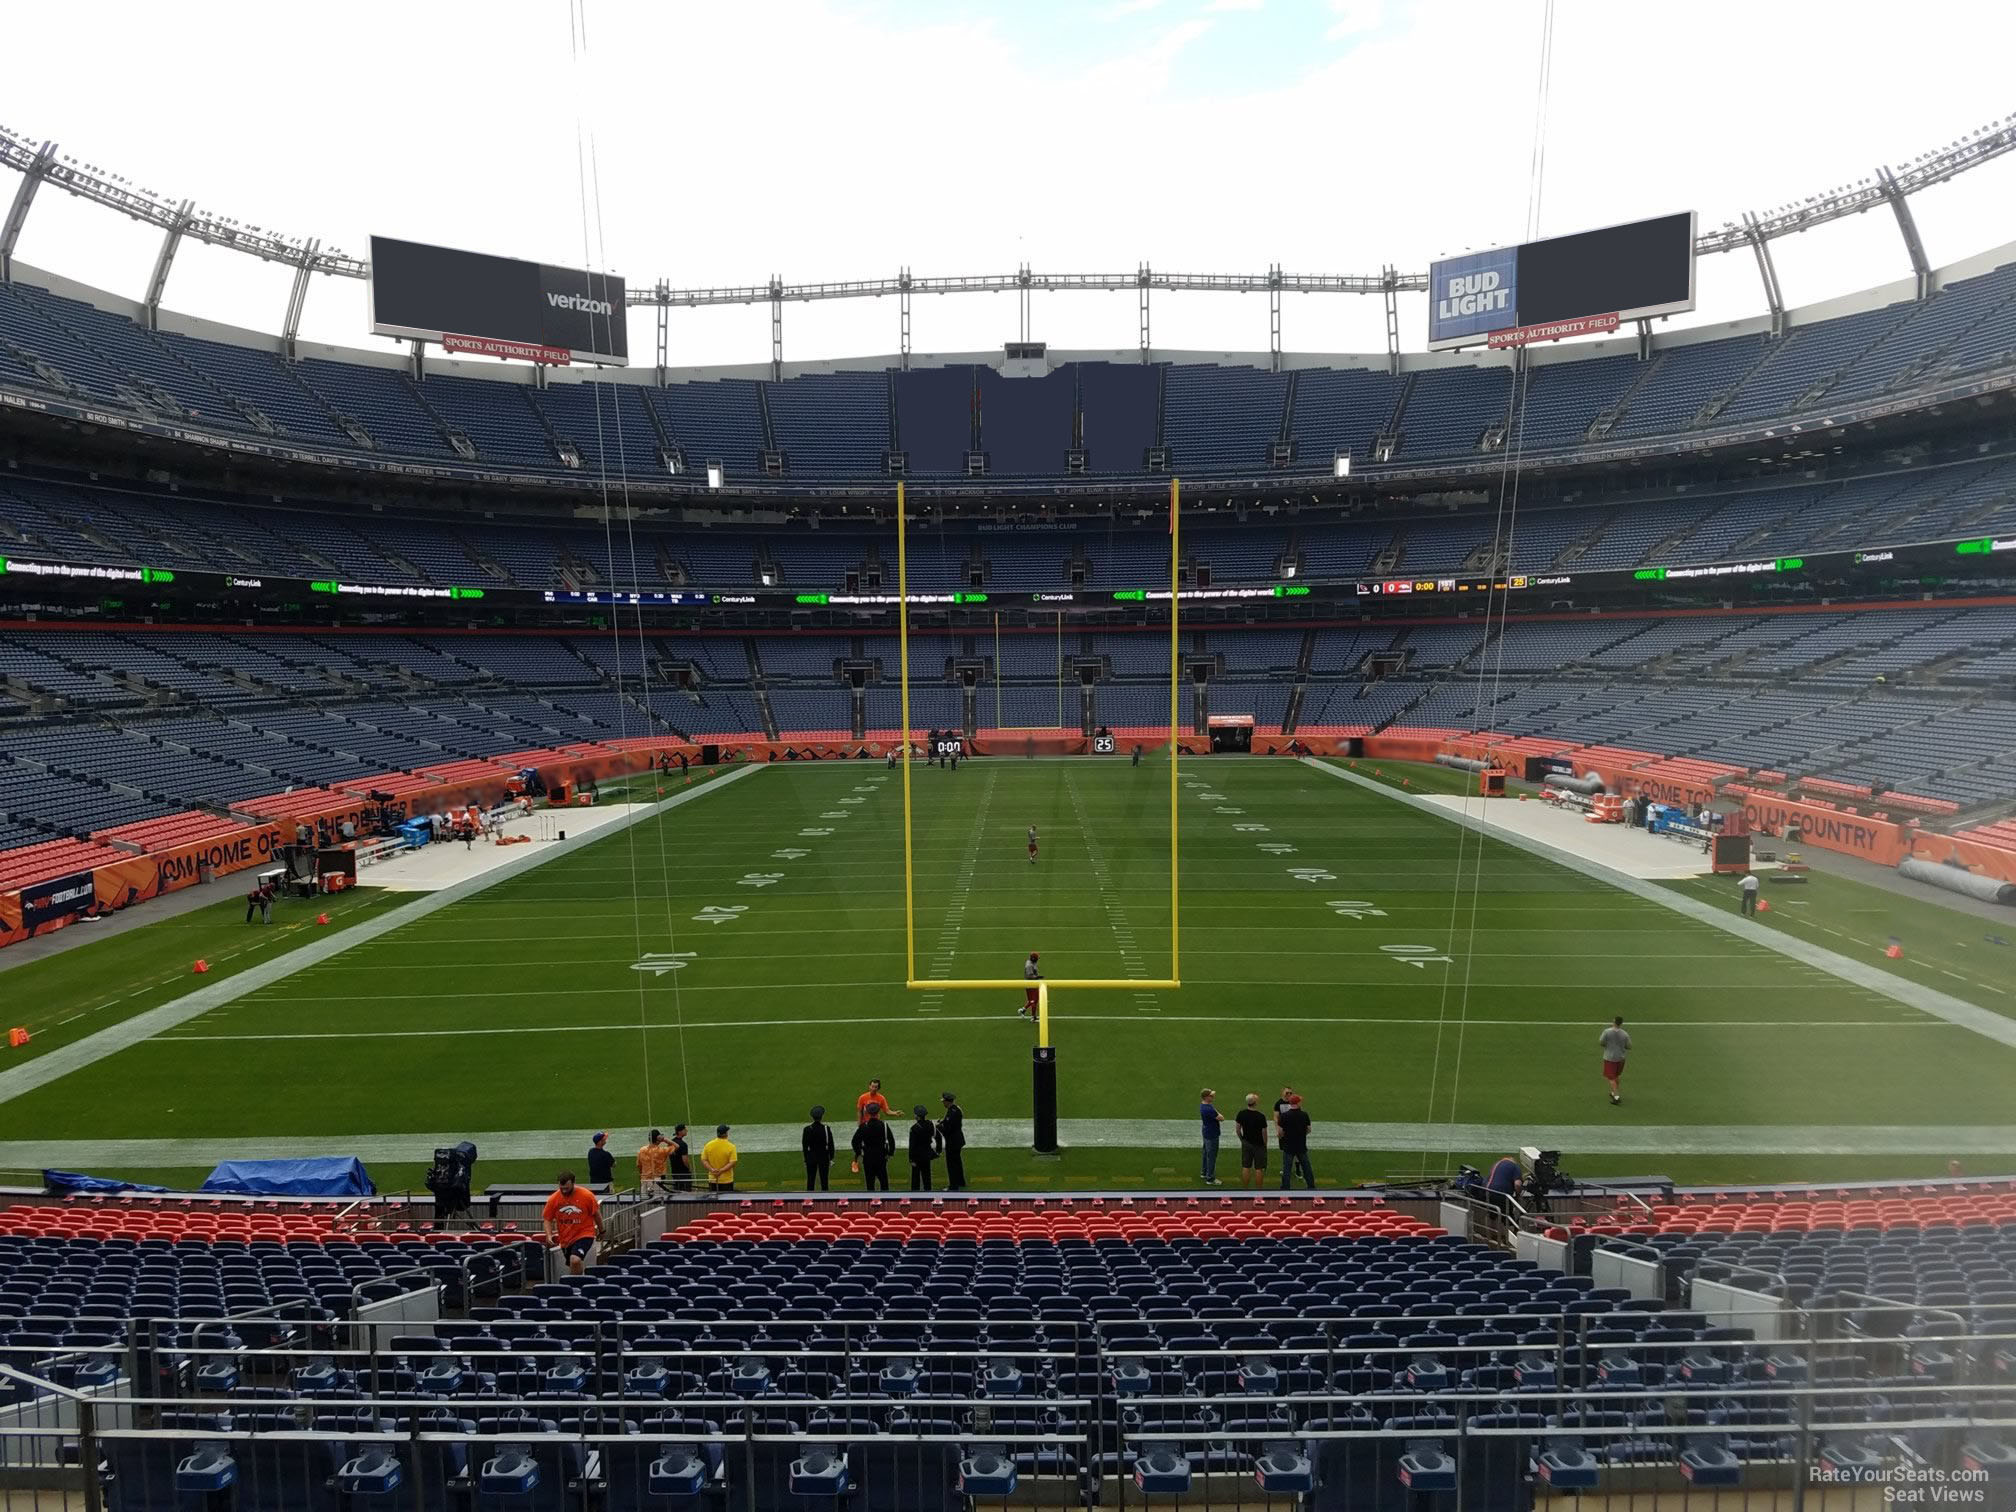 section 132, row 30 seat view  - empower field (at mile high)